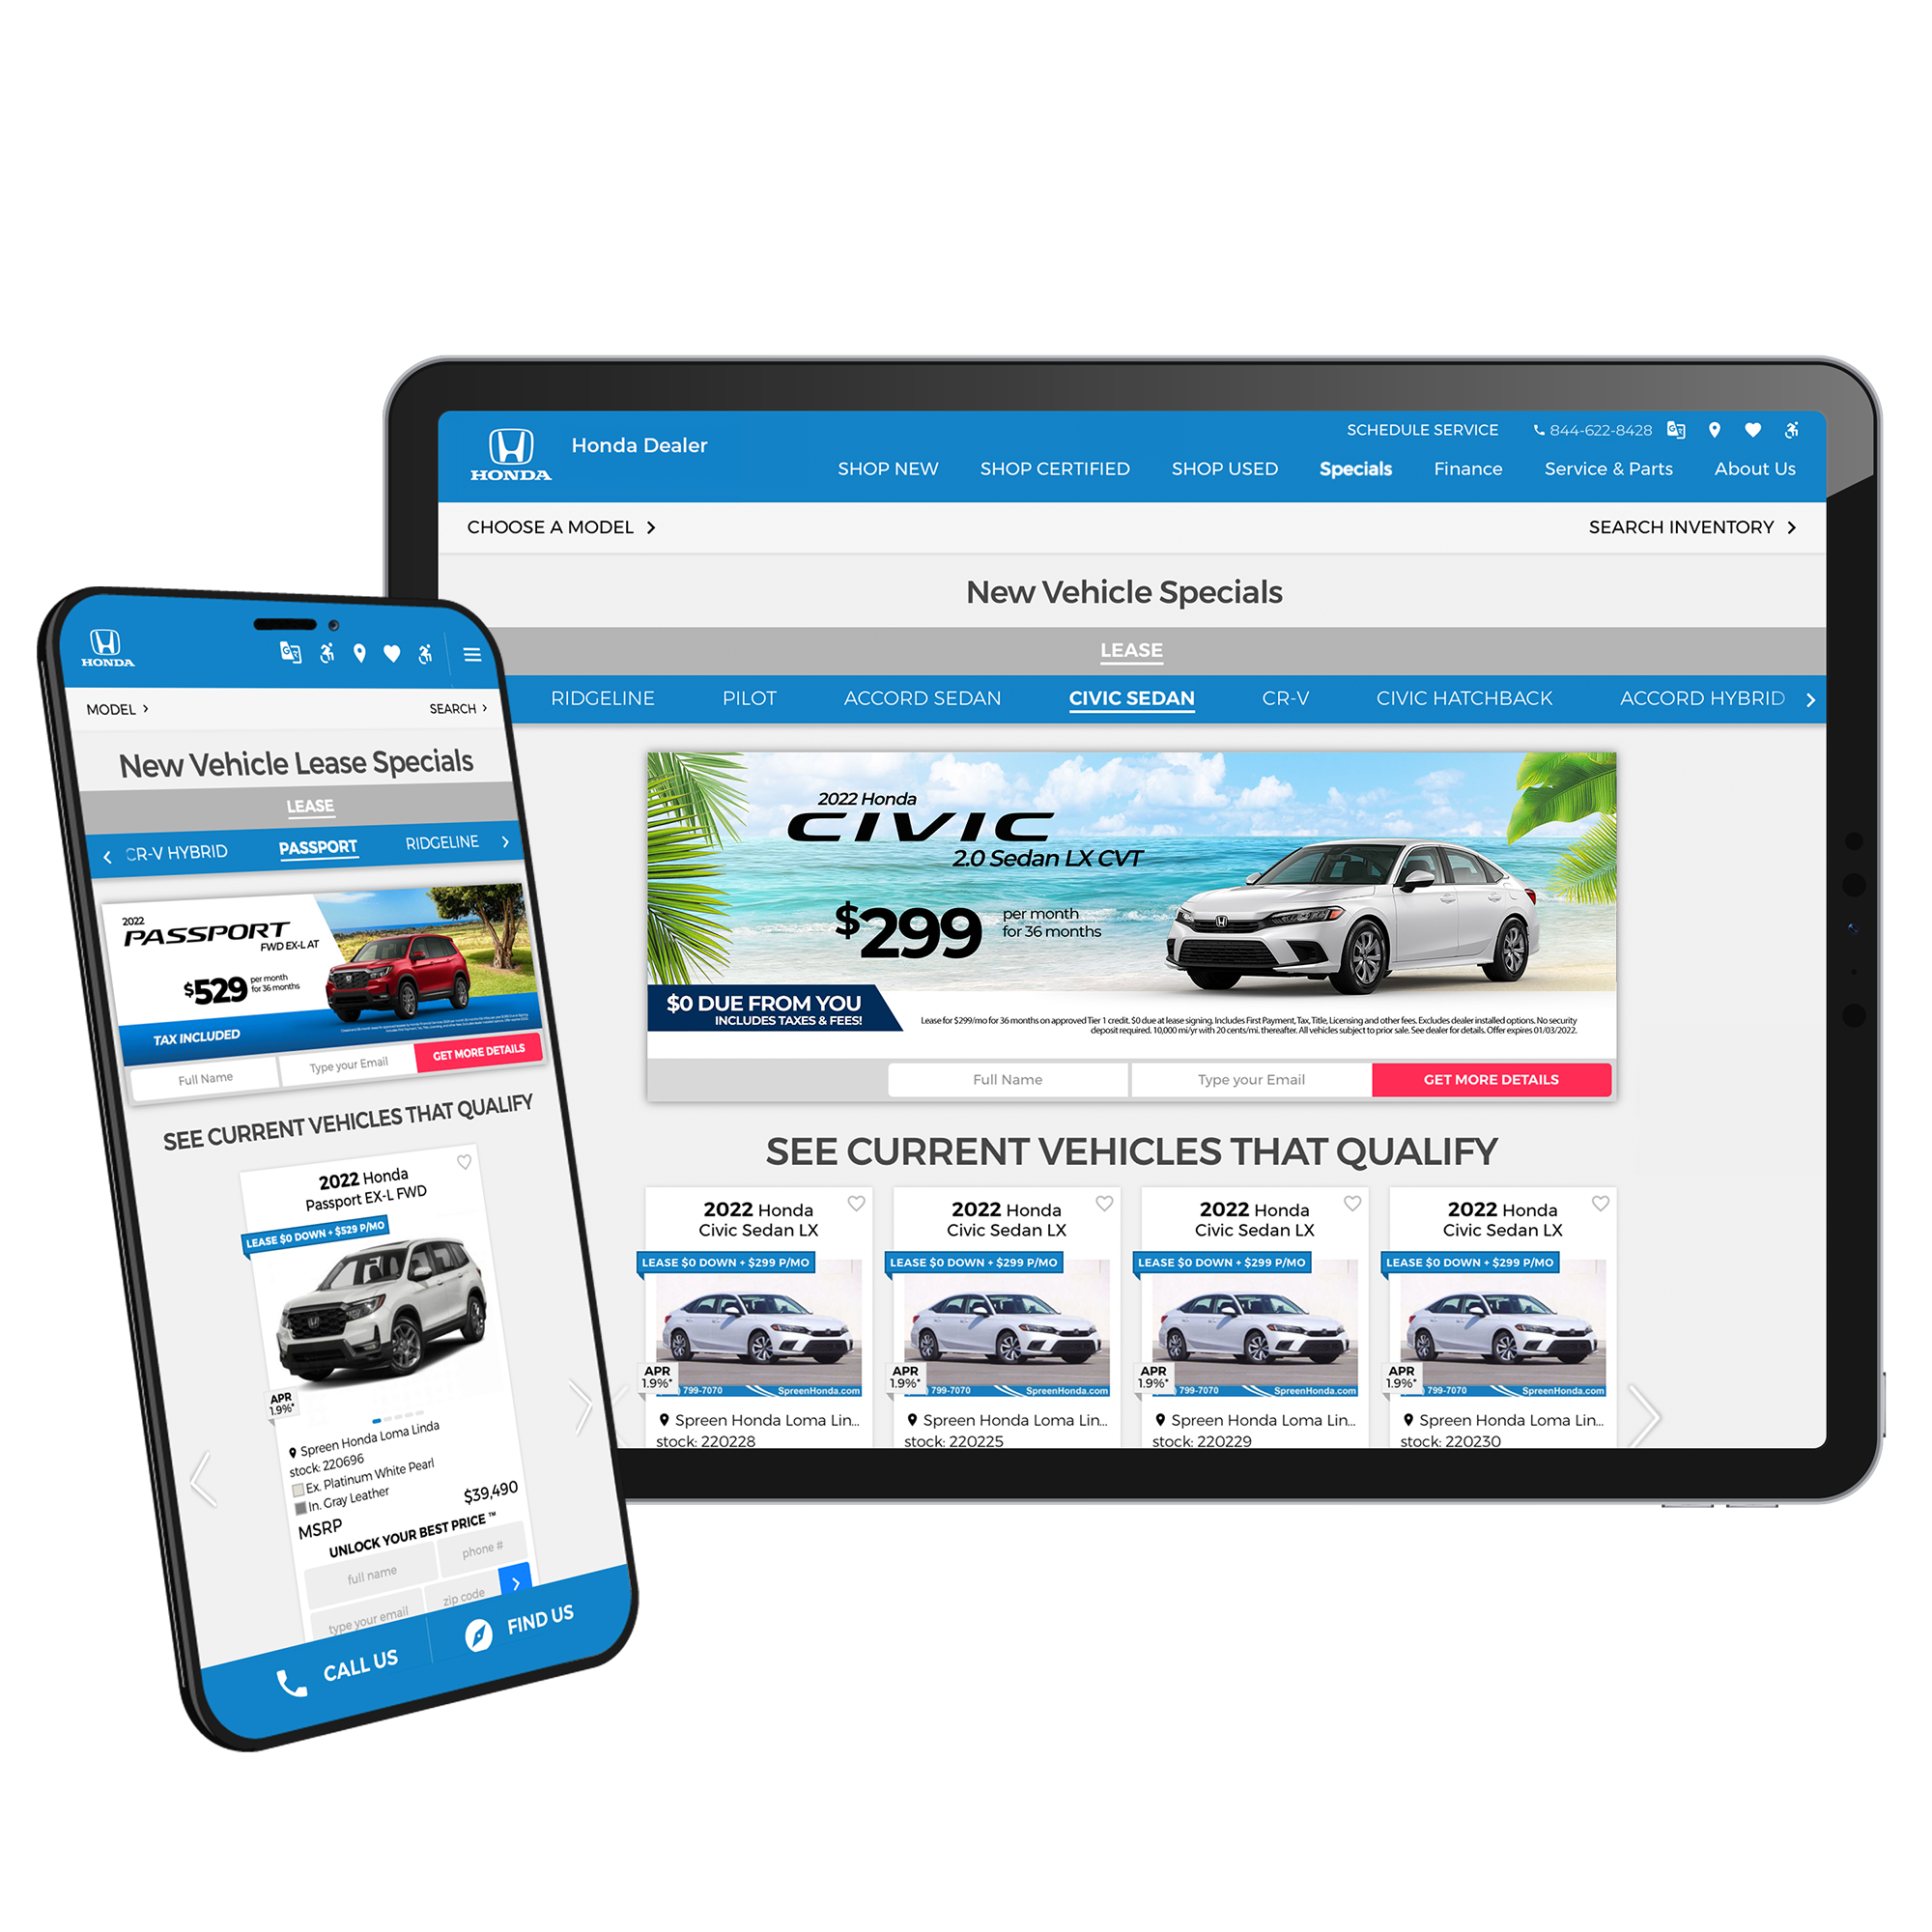 Smartphone and tablet with the Nabthat dealer’s website showing Honda’s New Vehicle Specials